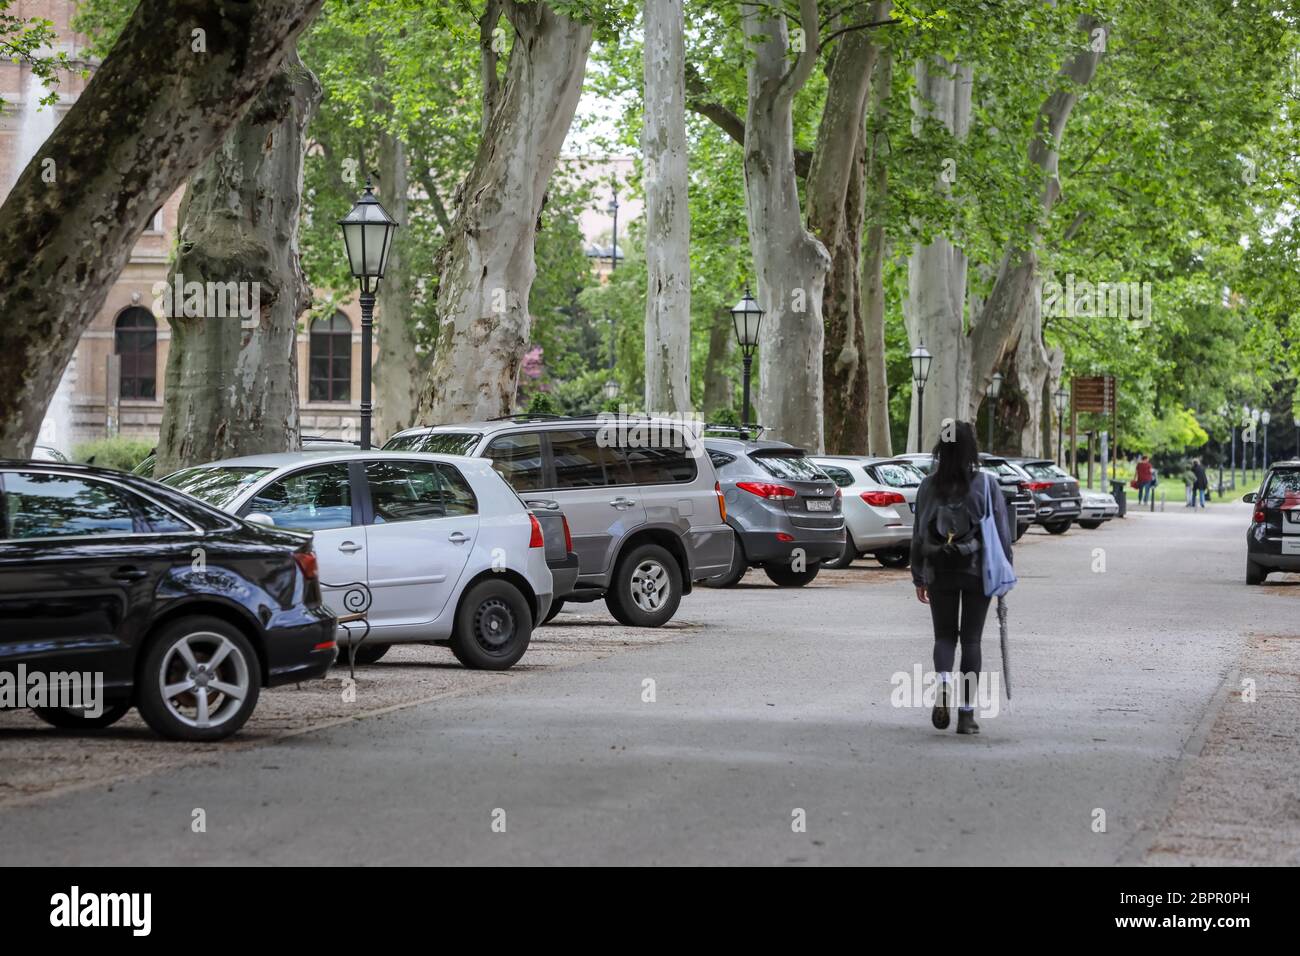 Zagreb, Croatia - April 16, 2020 : People after strong earthquake that damage lots of cars are parking cars in park Zrinjevac because of fear that a n Stock Photo